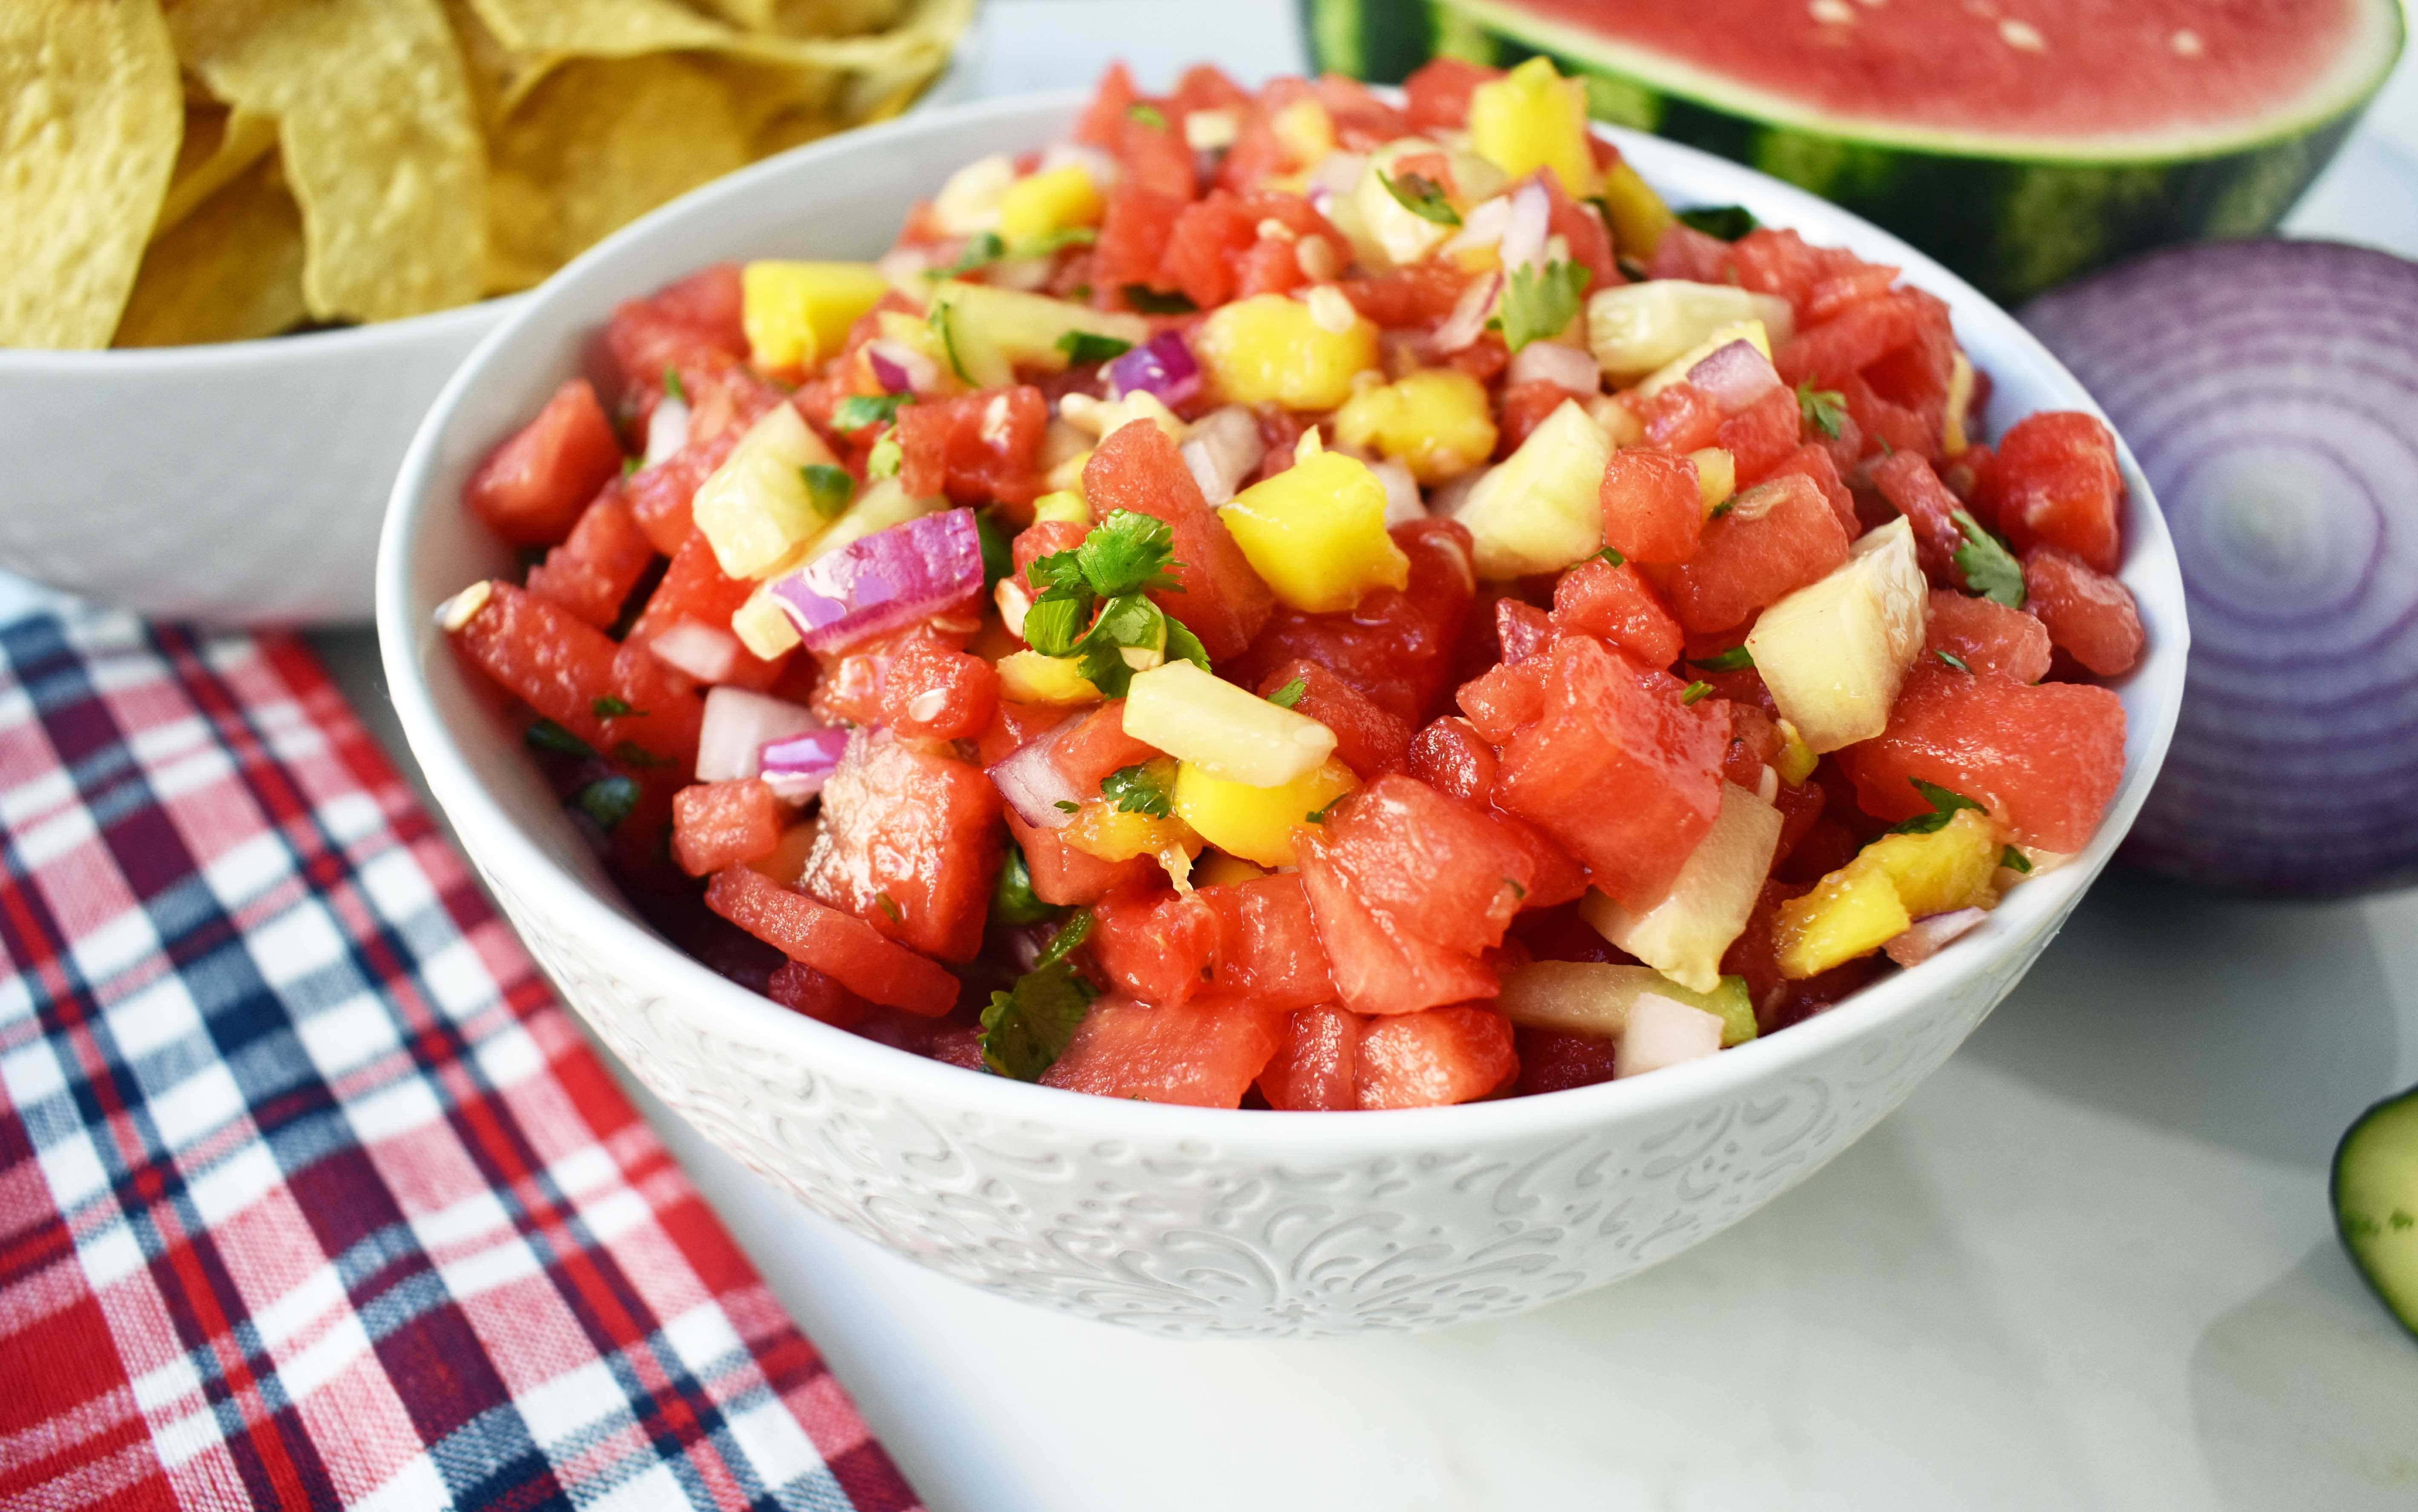 Watermelon Mango Salsa made with fresh watermelon, sweet mango, crisp cucumber, red onion, cilantro, jalapeno and a touch of honey. A sweet and spicy summer salsa. www.modernhoney.com